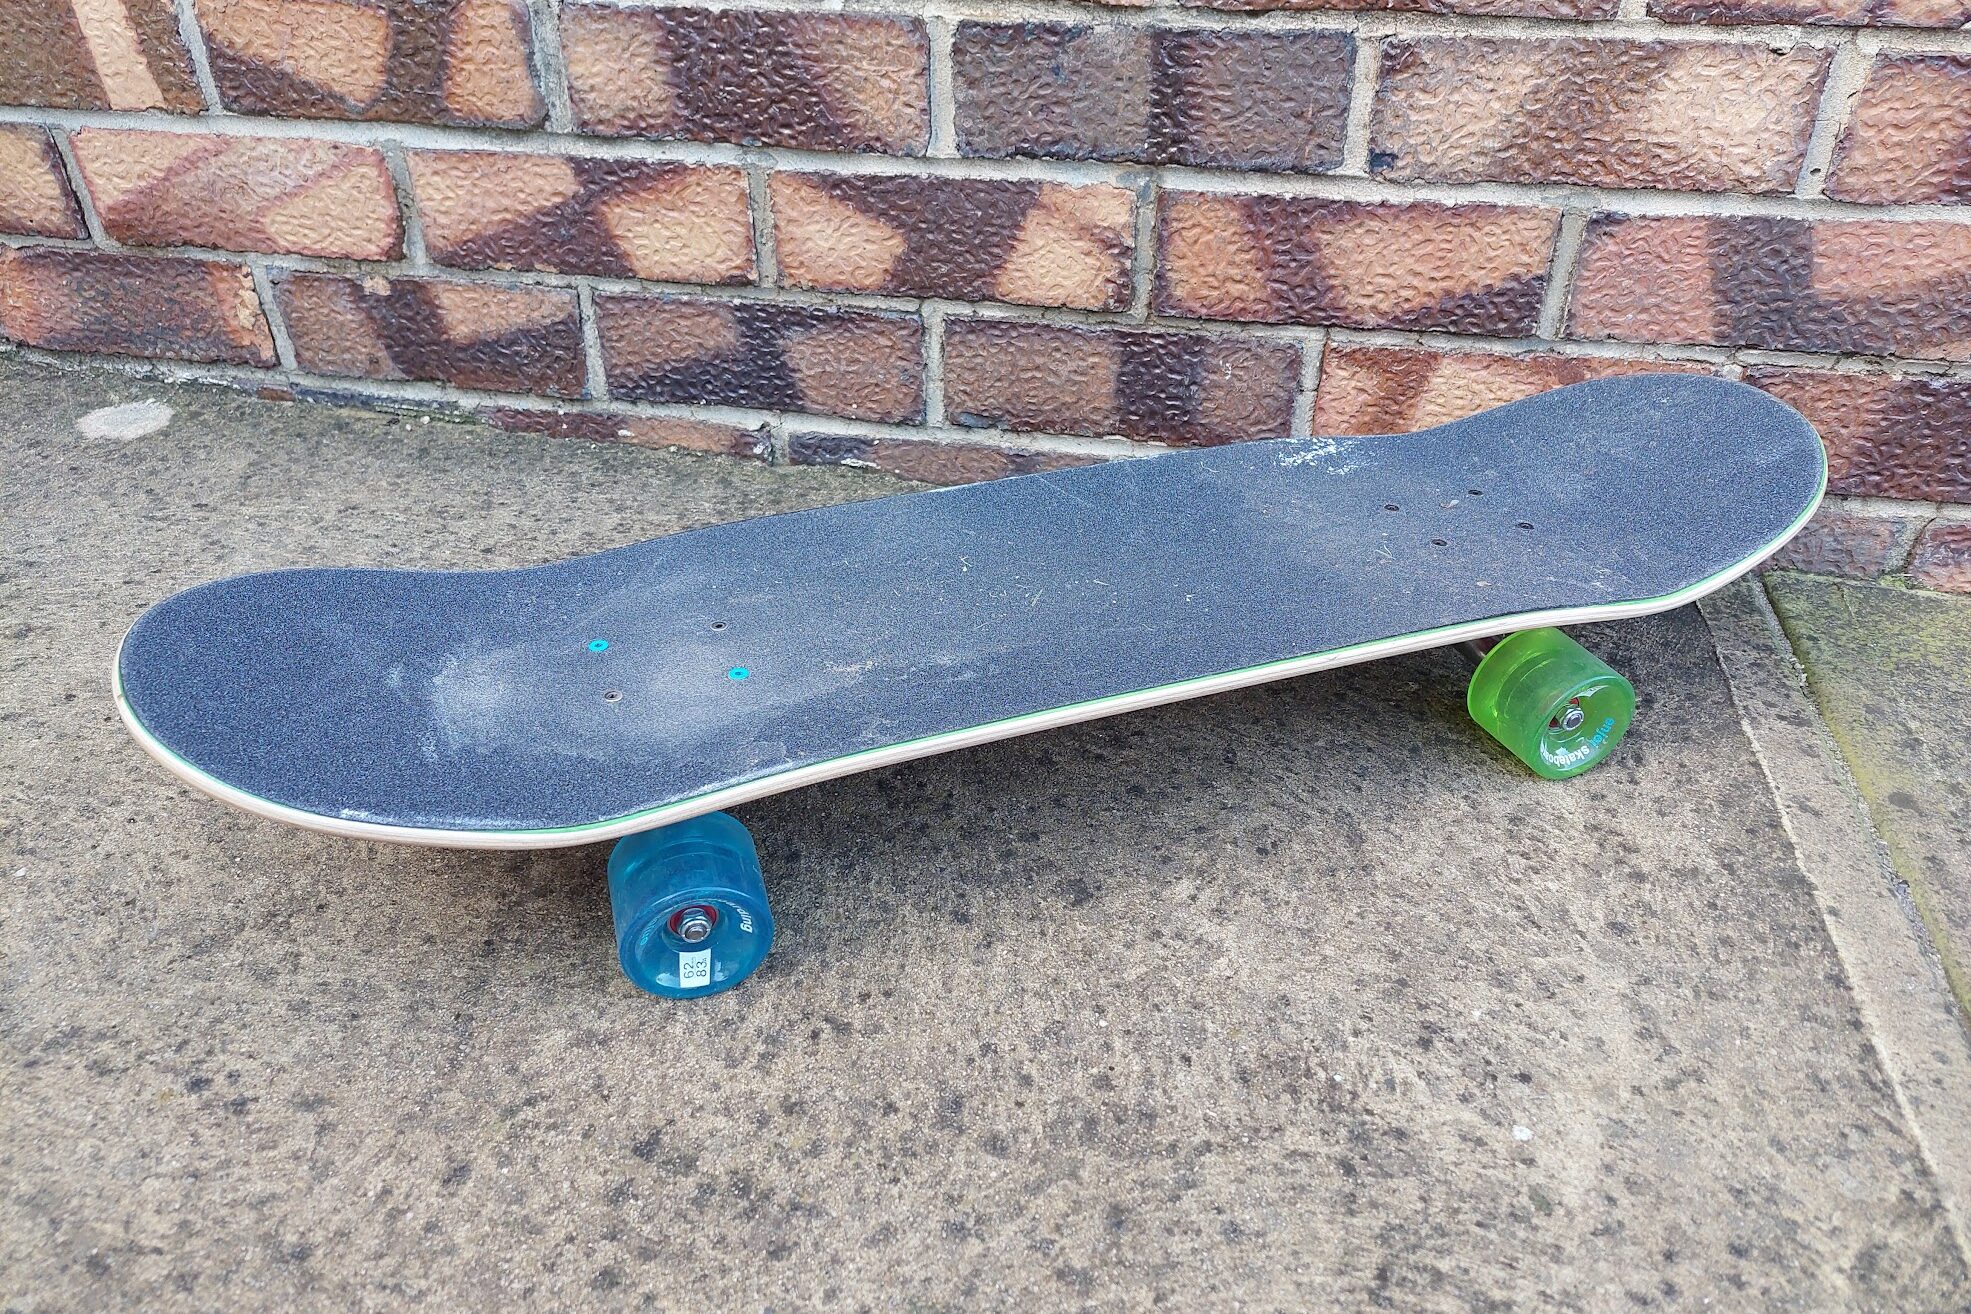 A dirty skateboard with black grip tape and blue and green wheels is sitting stationary on concrete with a brick wall in the background.